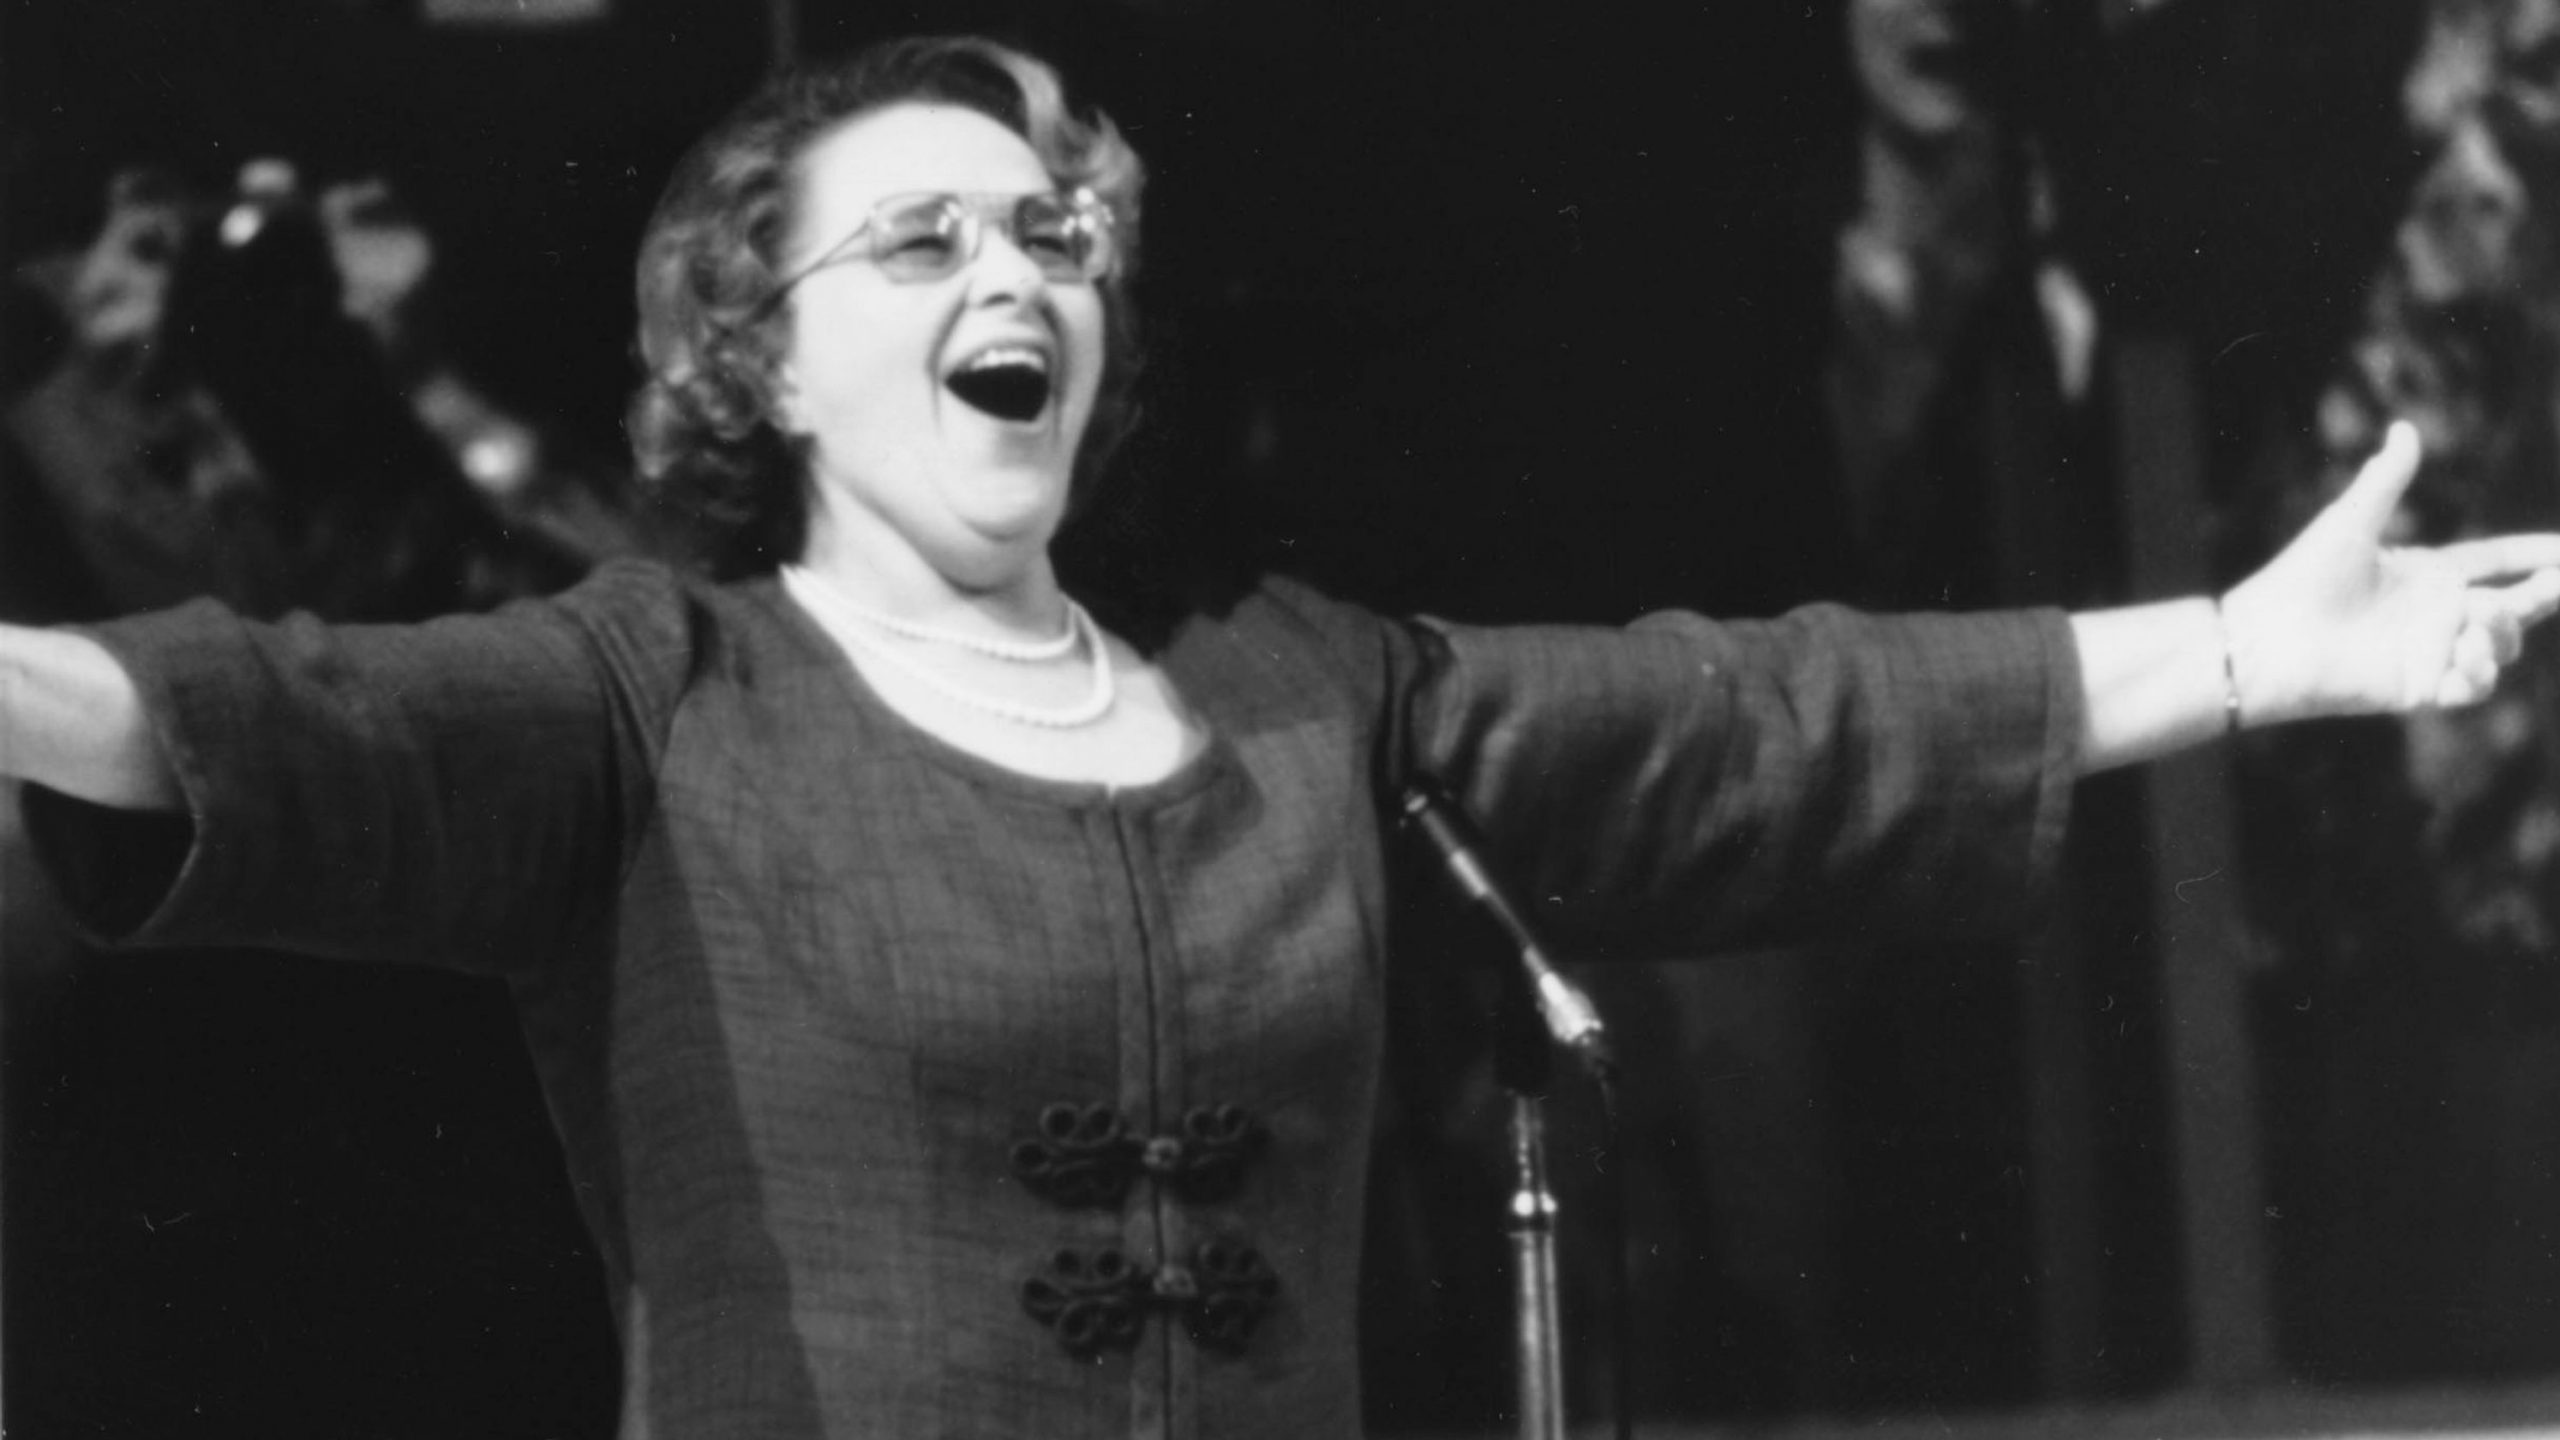 Yankees and Flyers Drop Kate Smith's 'God Bless America' Over Past Racist Songs